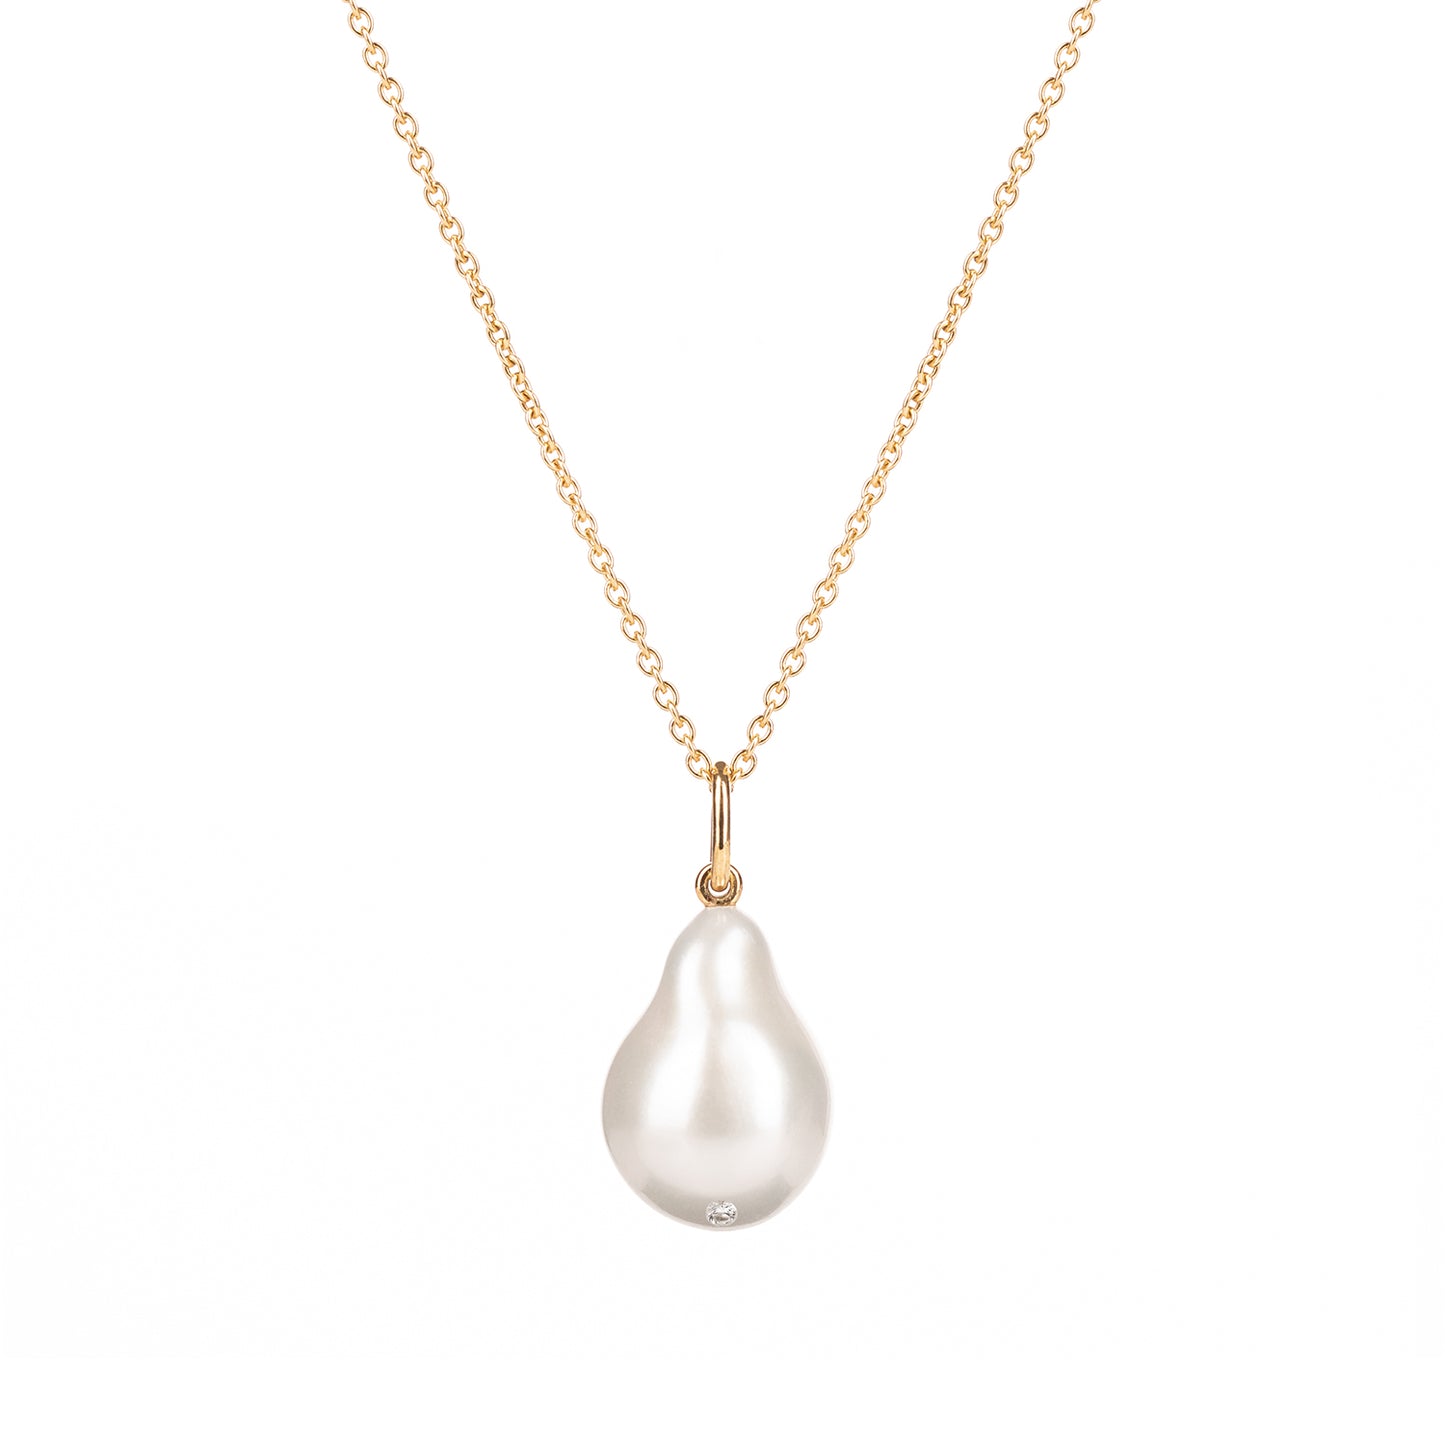 Baroque Pearl Necklace by McFarlane Fine Jewellery